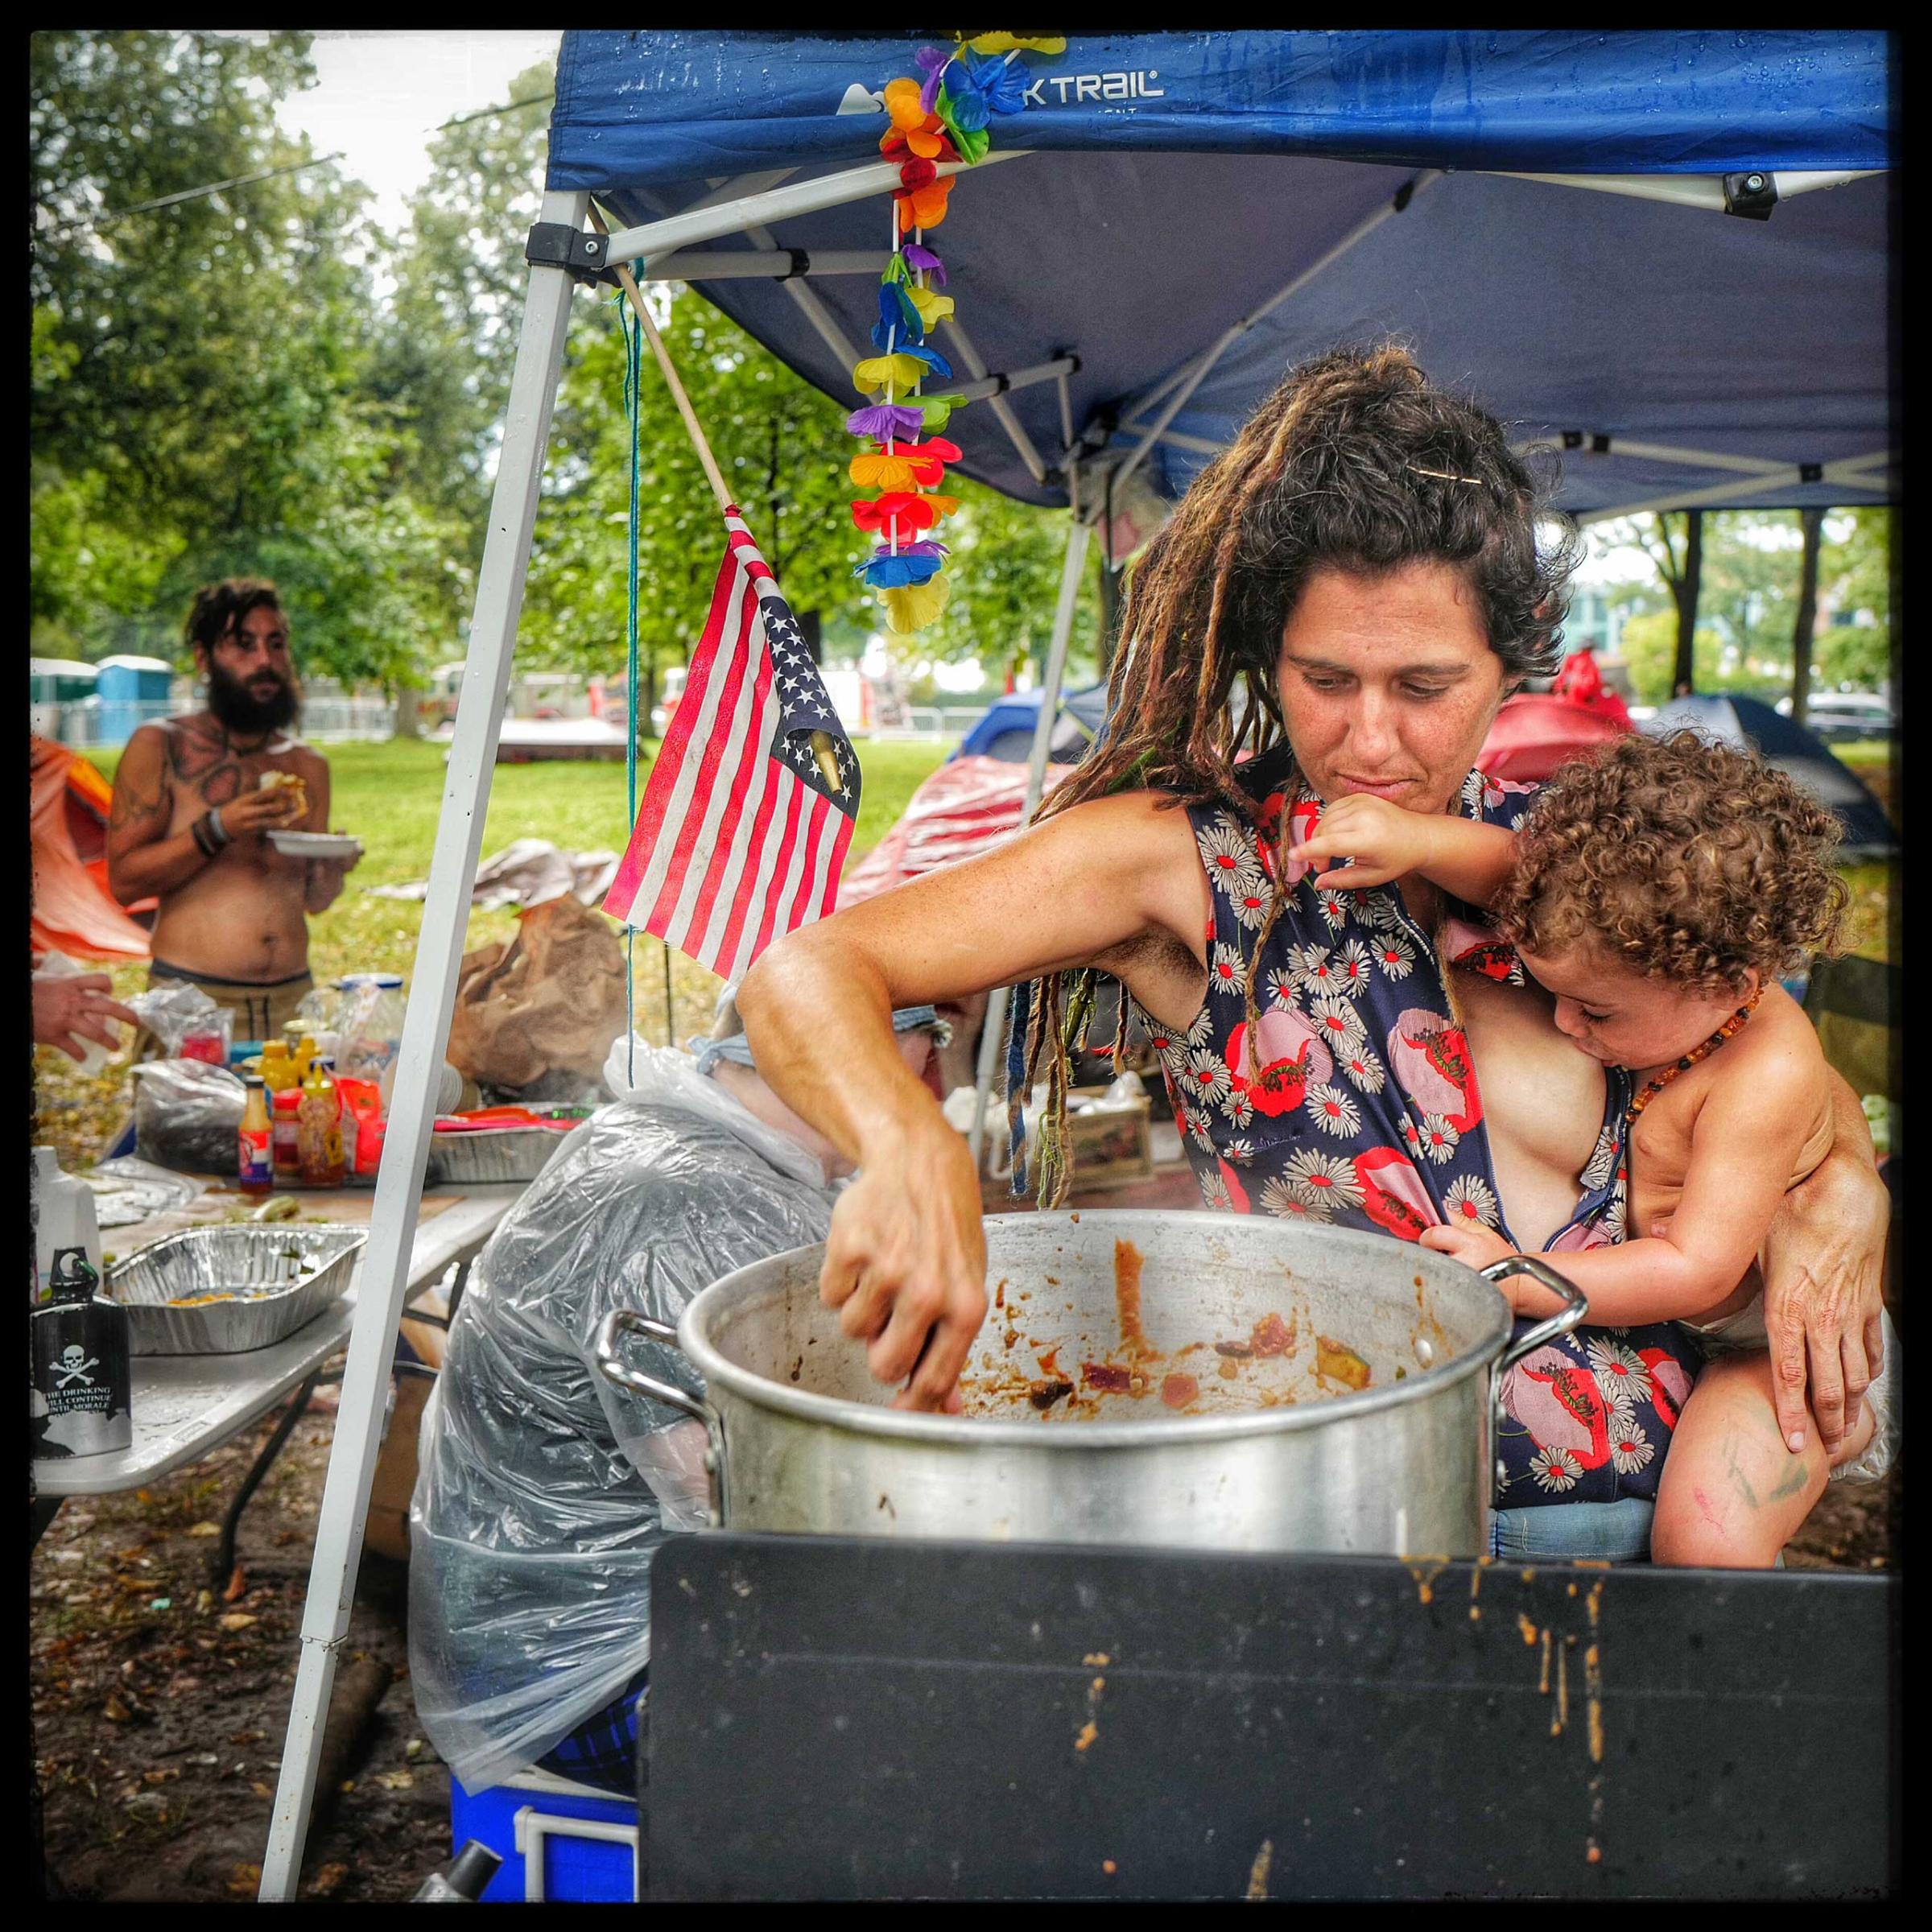 Stacey and her daughter Joy prepare a pot of zucchini, tomatoes and squash for protestors at the Democratic National Convention that was held in Philadelphia.